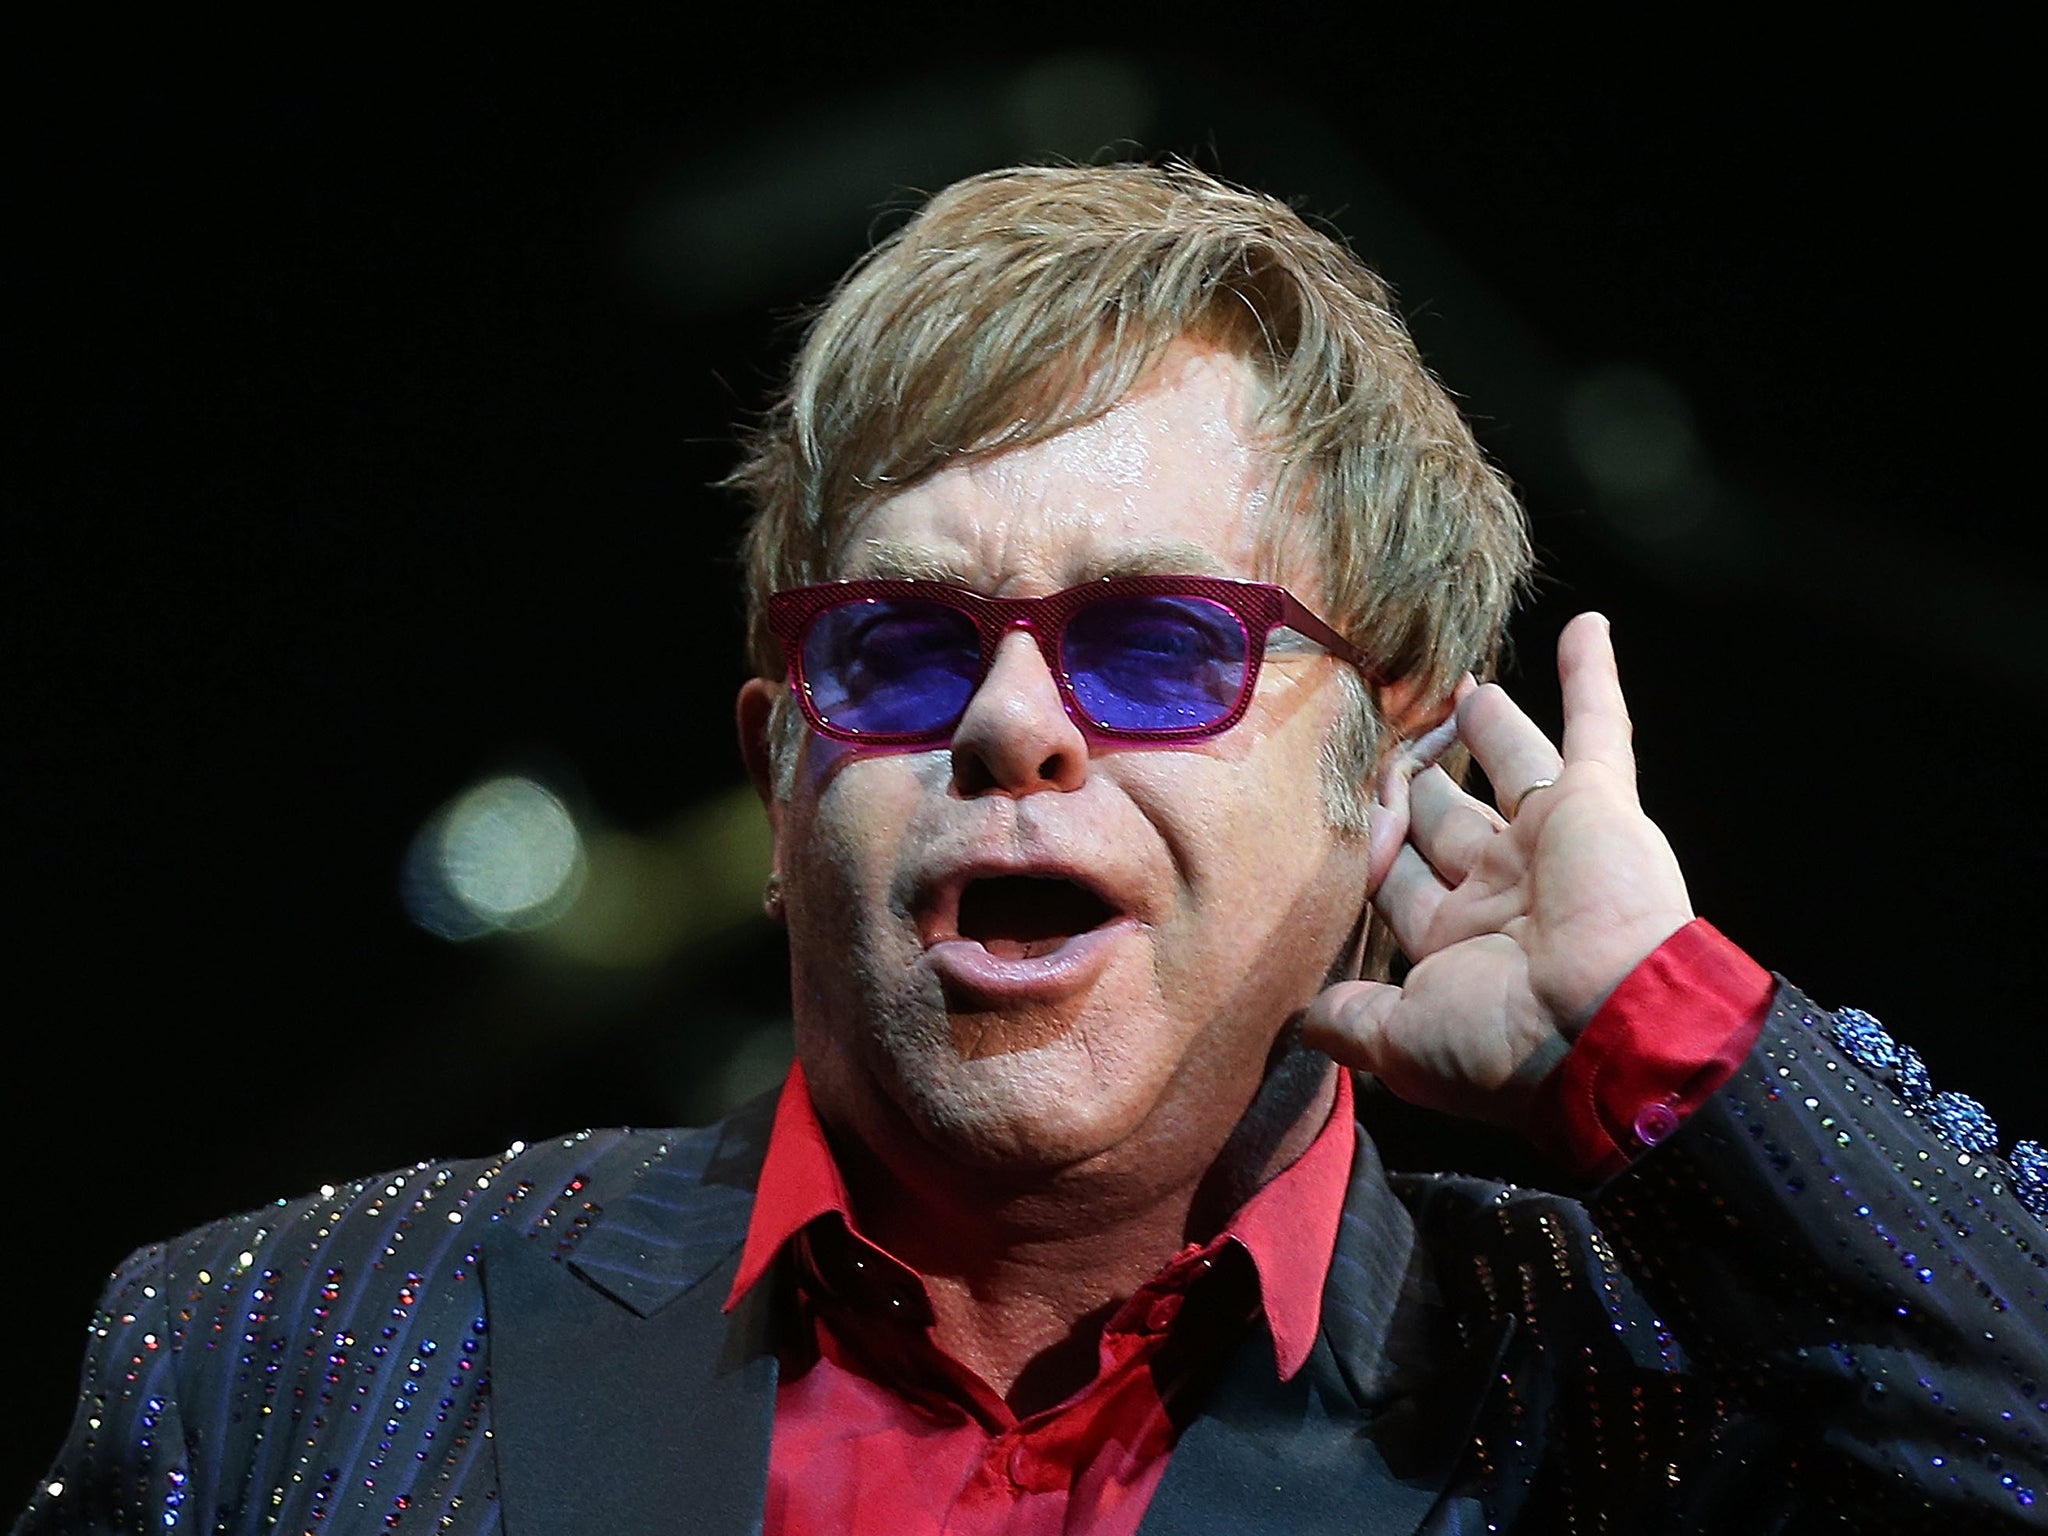 Sir Elton used his Instagram page to share his alarm and frustration at Mayor Luigi Brugnaro's 'divisive' move